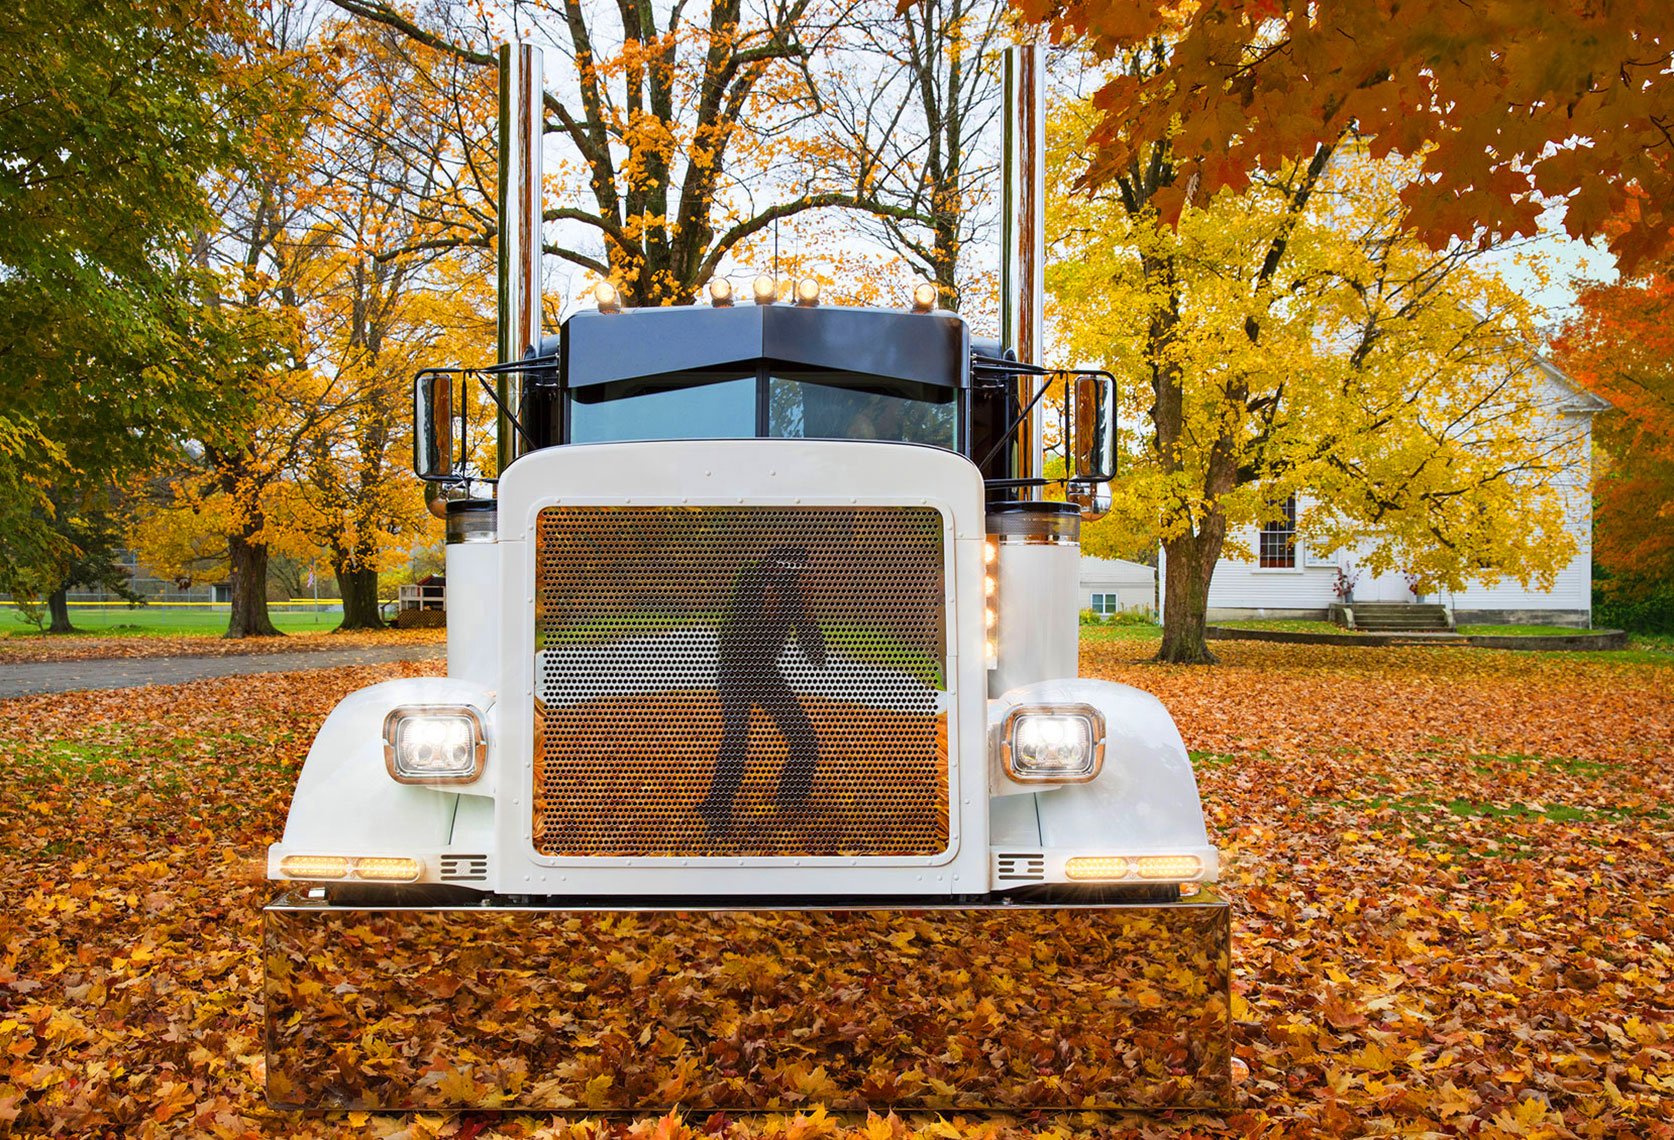 Commercial Trucking Photography - Roger Snider - Truck in Leaves - Burlington Vermont